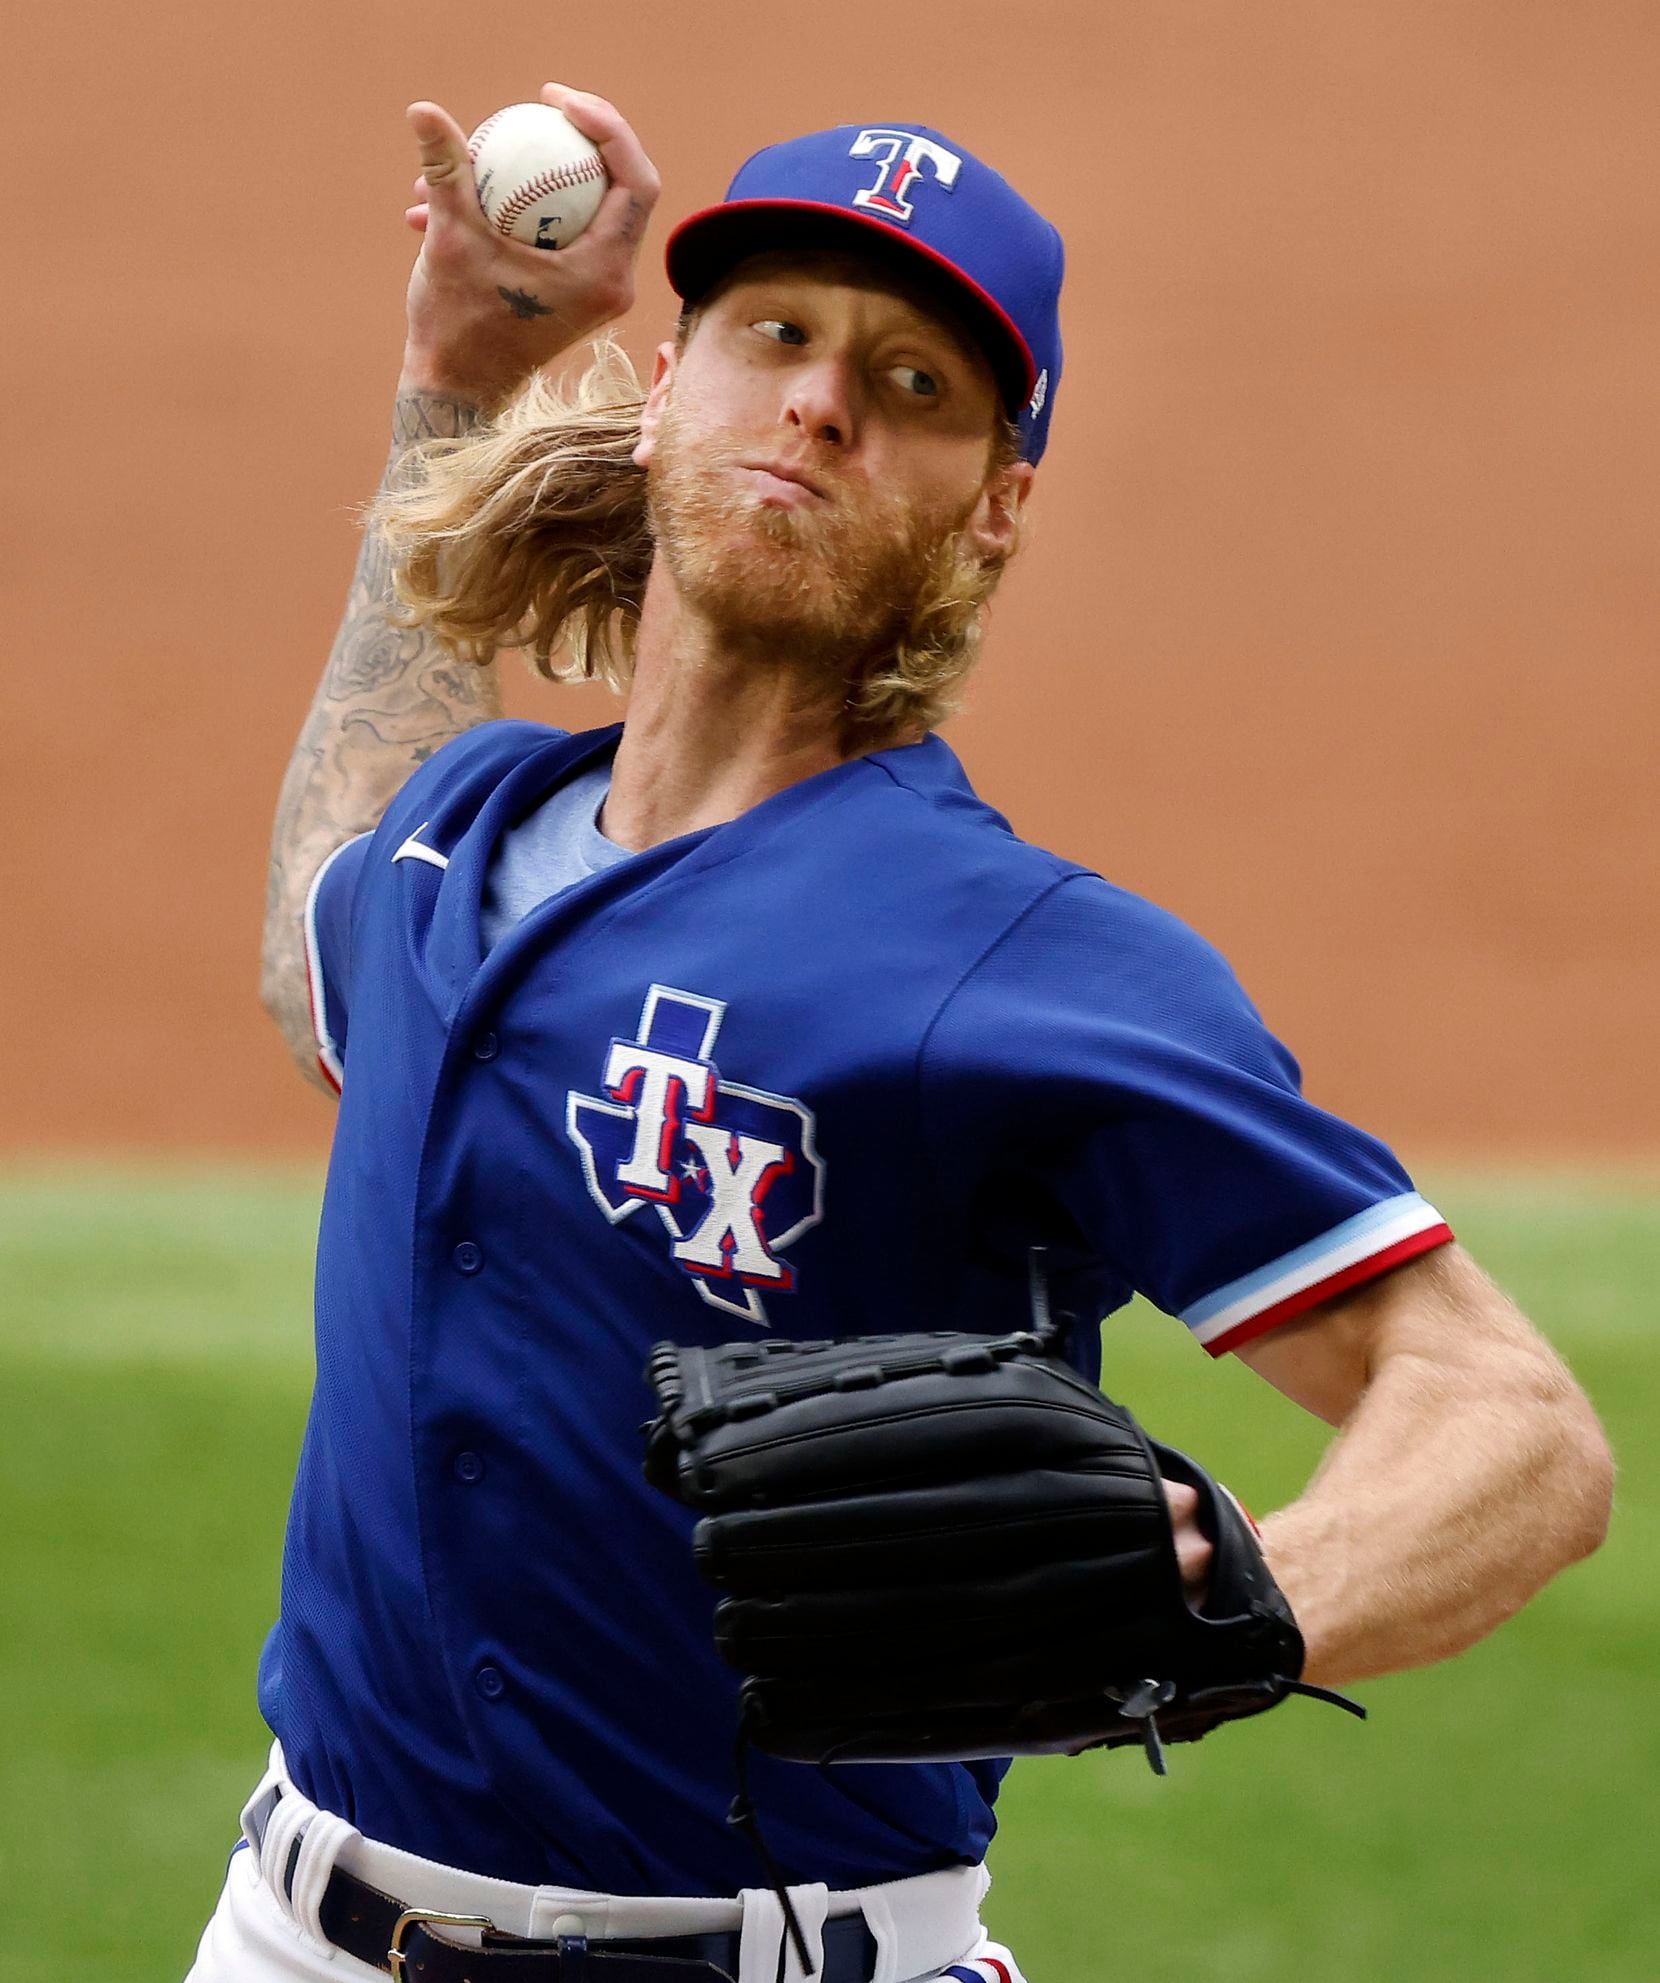 Texas Rangers starting pitcher Mike Foltynewicz (20) throws against the Milwaukee Brewers in the third inning at Globe Life Field in Arlington, Texas. The teams were playing in an exhibition game, Tuesday, March 30, 2021. (Tom Fox/The Dallas Morning News)